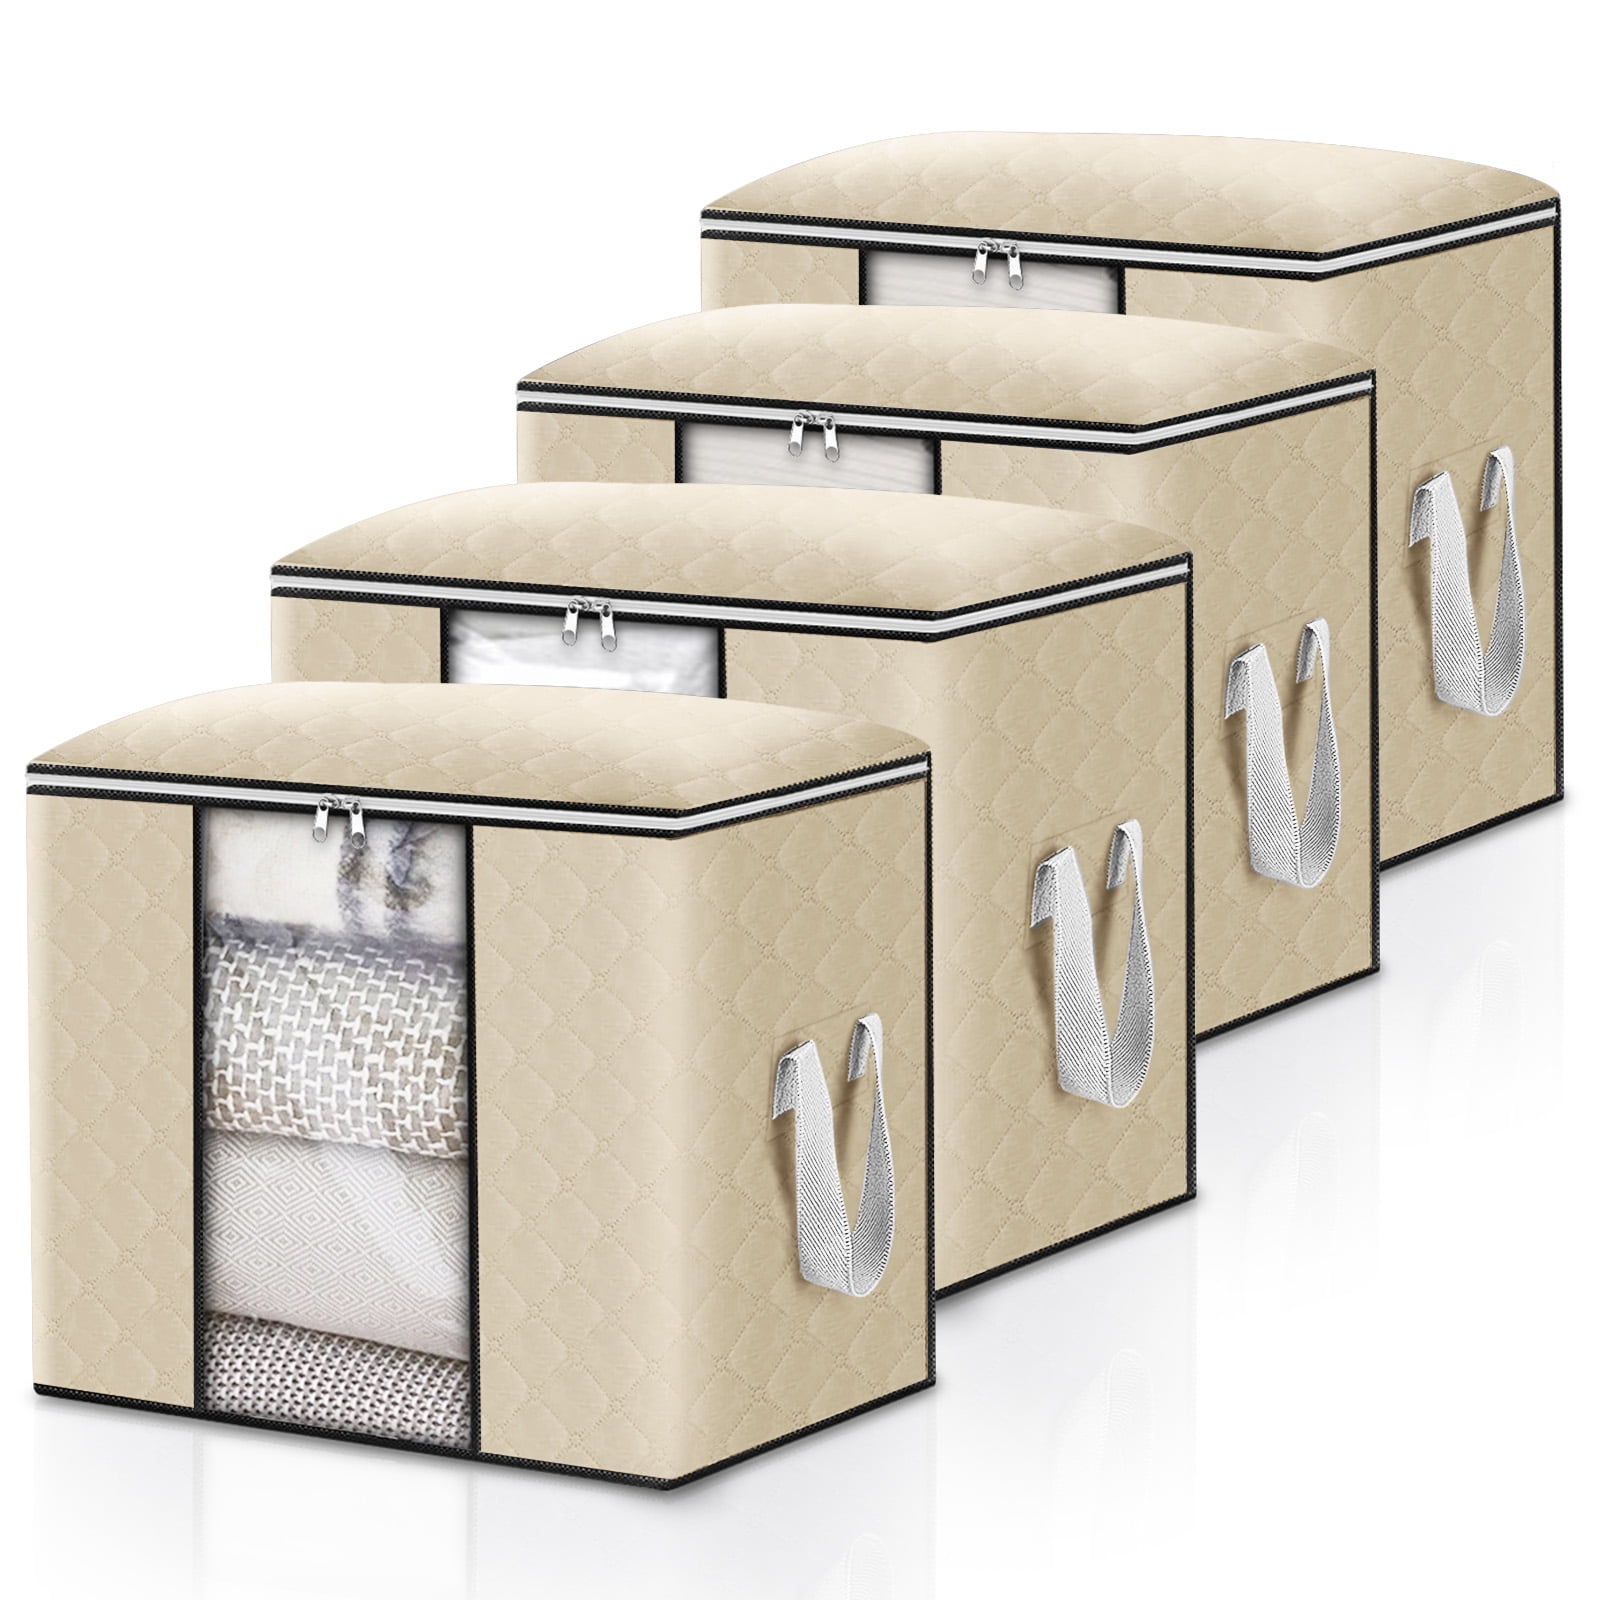 Tooca Clothes Storage Bags Organizers, 4pcs Closet Storage Organizers Large Capacity Blanket Storage Bags for Clothes with Reinforced Handle, 3 Layer